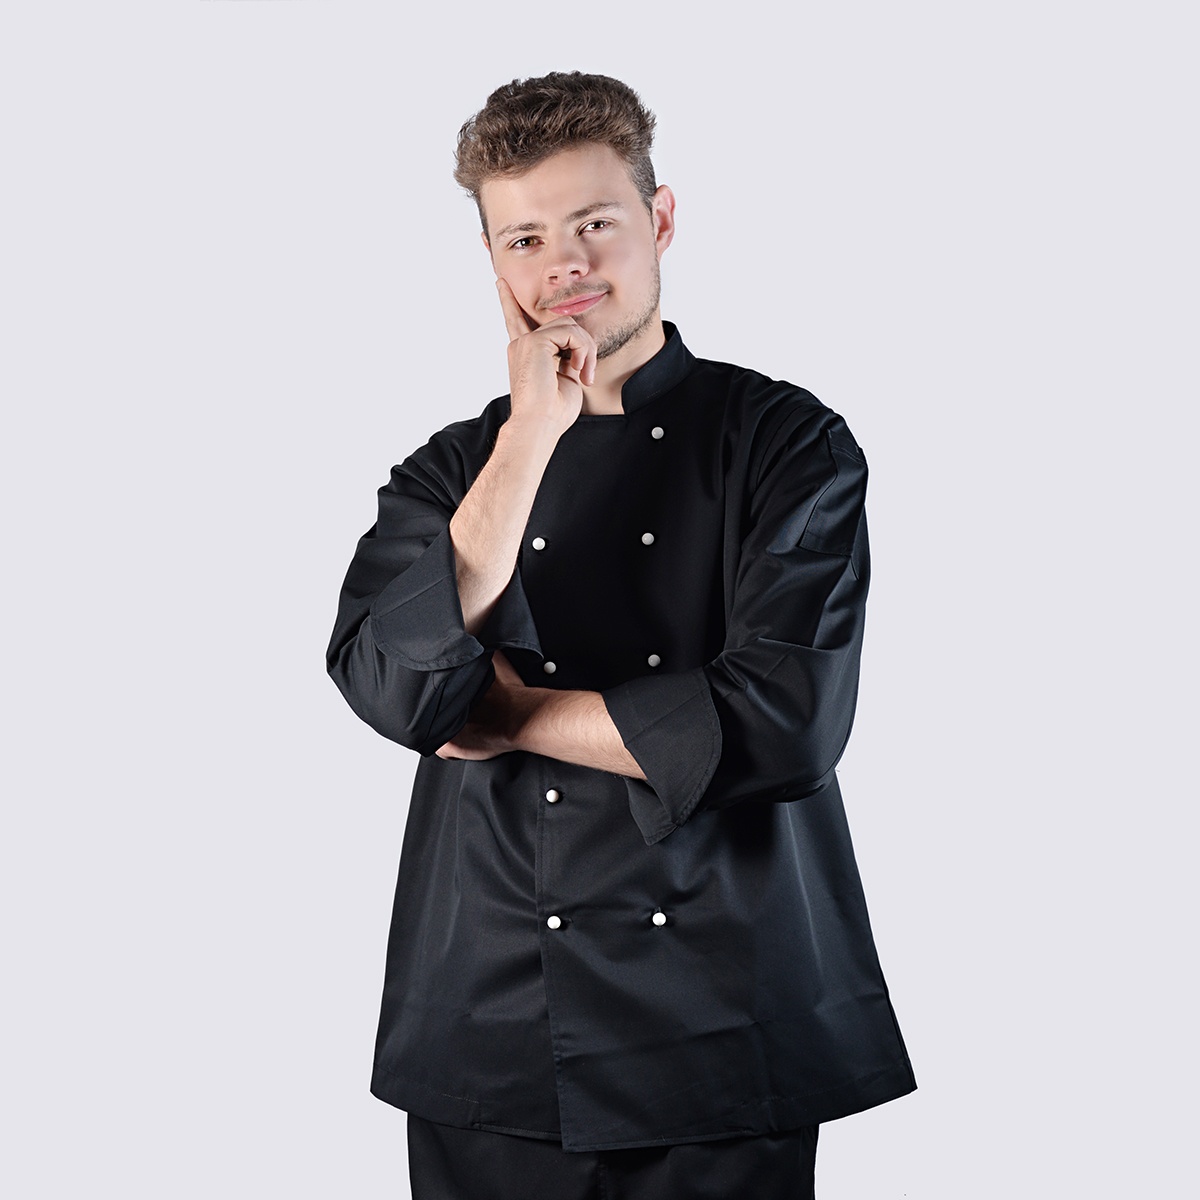 chef jackets black long sleeve with white buttons